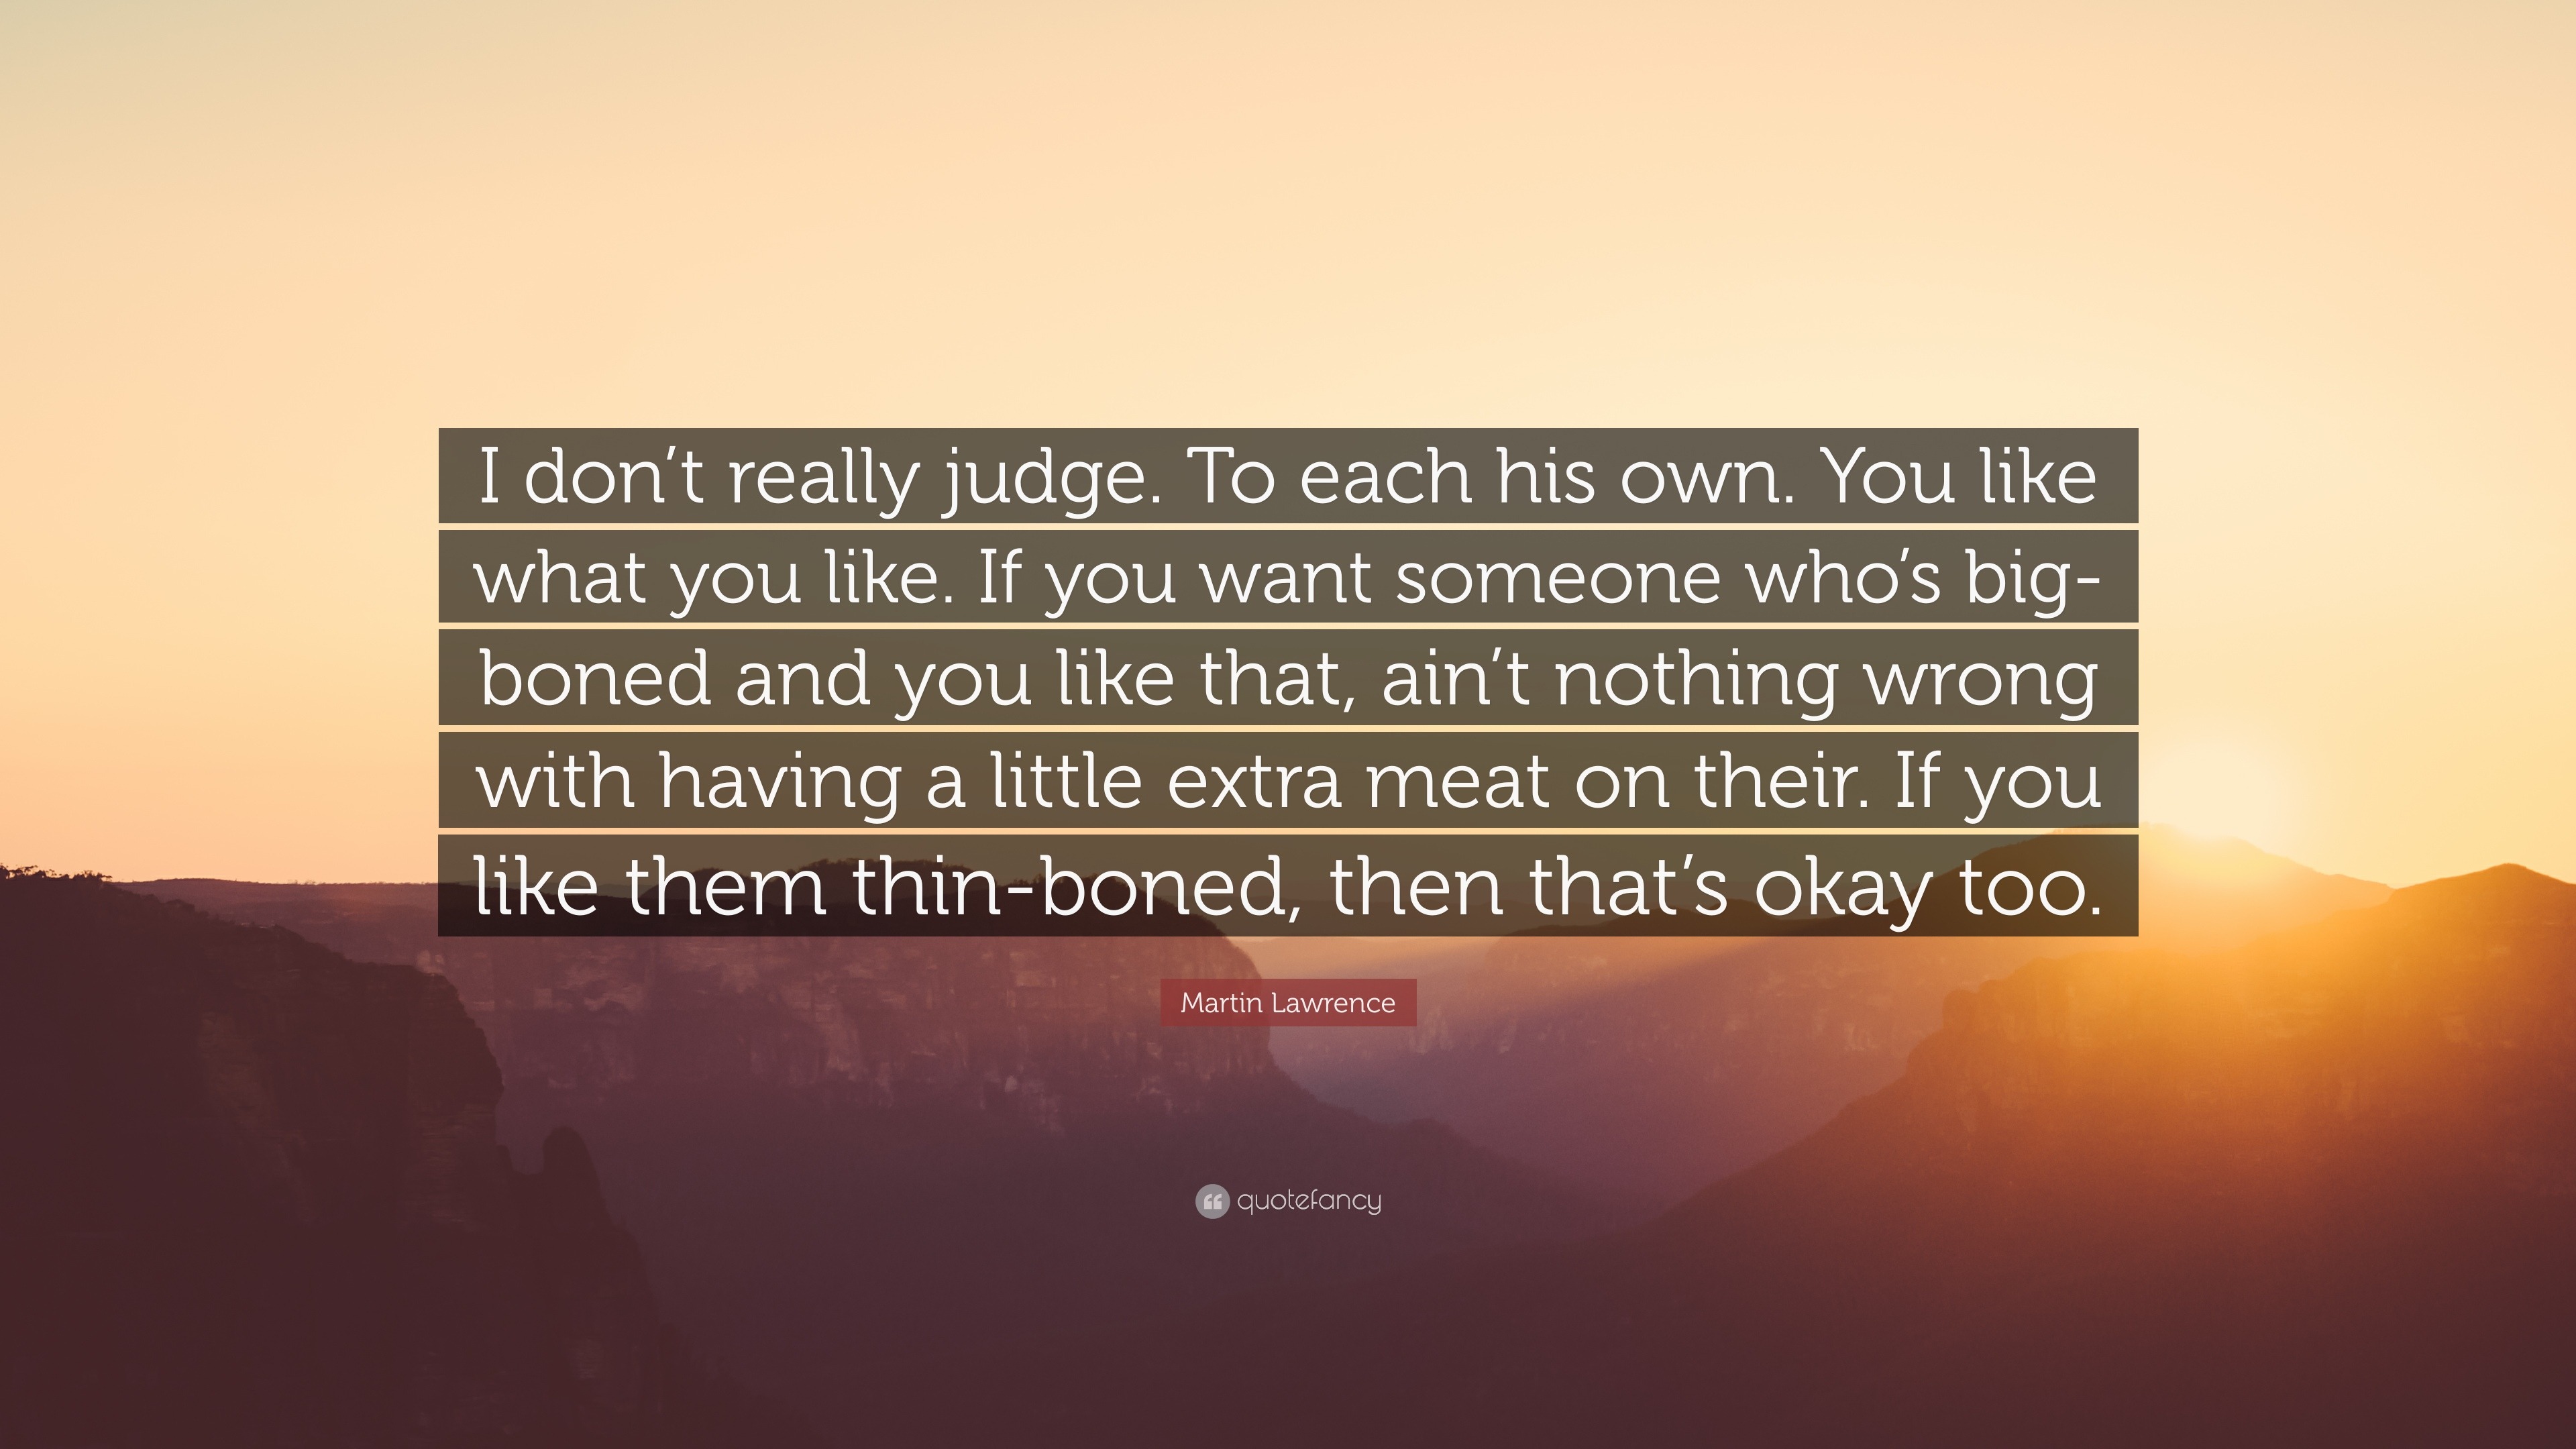 Martin Lawrence Quote: “I don't really judge. To each his own. You like  what you like. If you want someone who's big-boned and you like that, ai”